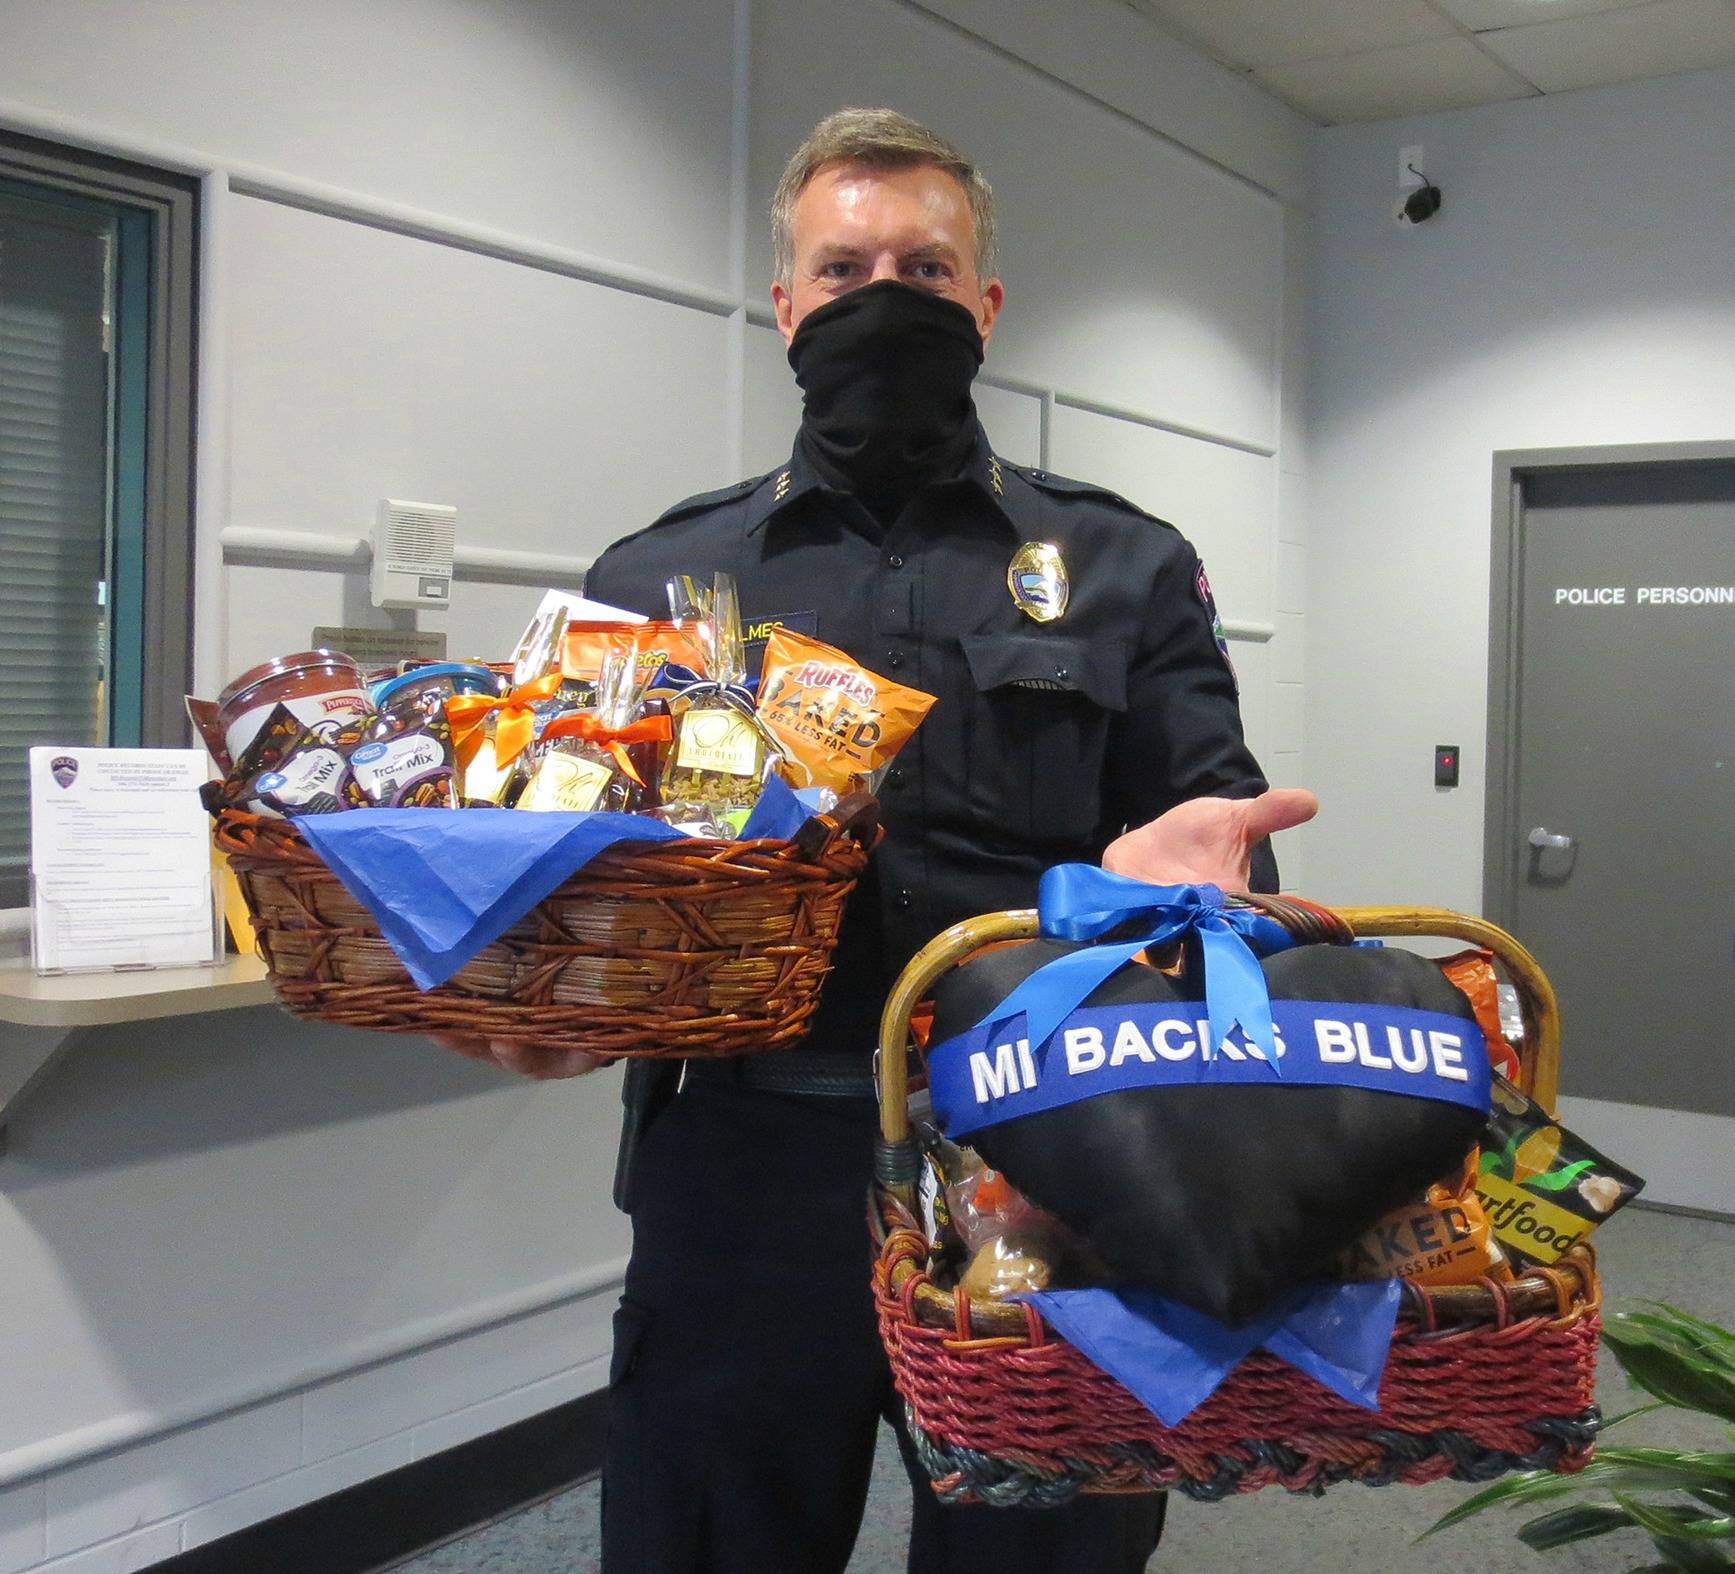 Mercer Island Police Department Chief Ed Holmes displays baskets of treats that were assembled by a group of residents to express their gratitude for the department. The baskets, which were dropped off the morning of Oct. 27, included dozens of homemade cookies, brownies and banana bread as well as popular off-the-shelf items. Courtesy photo